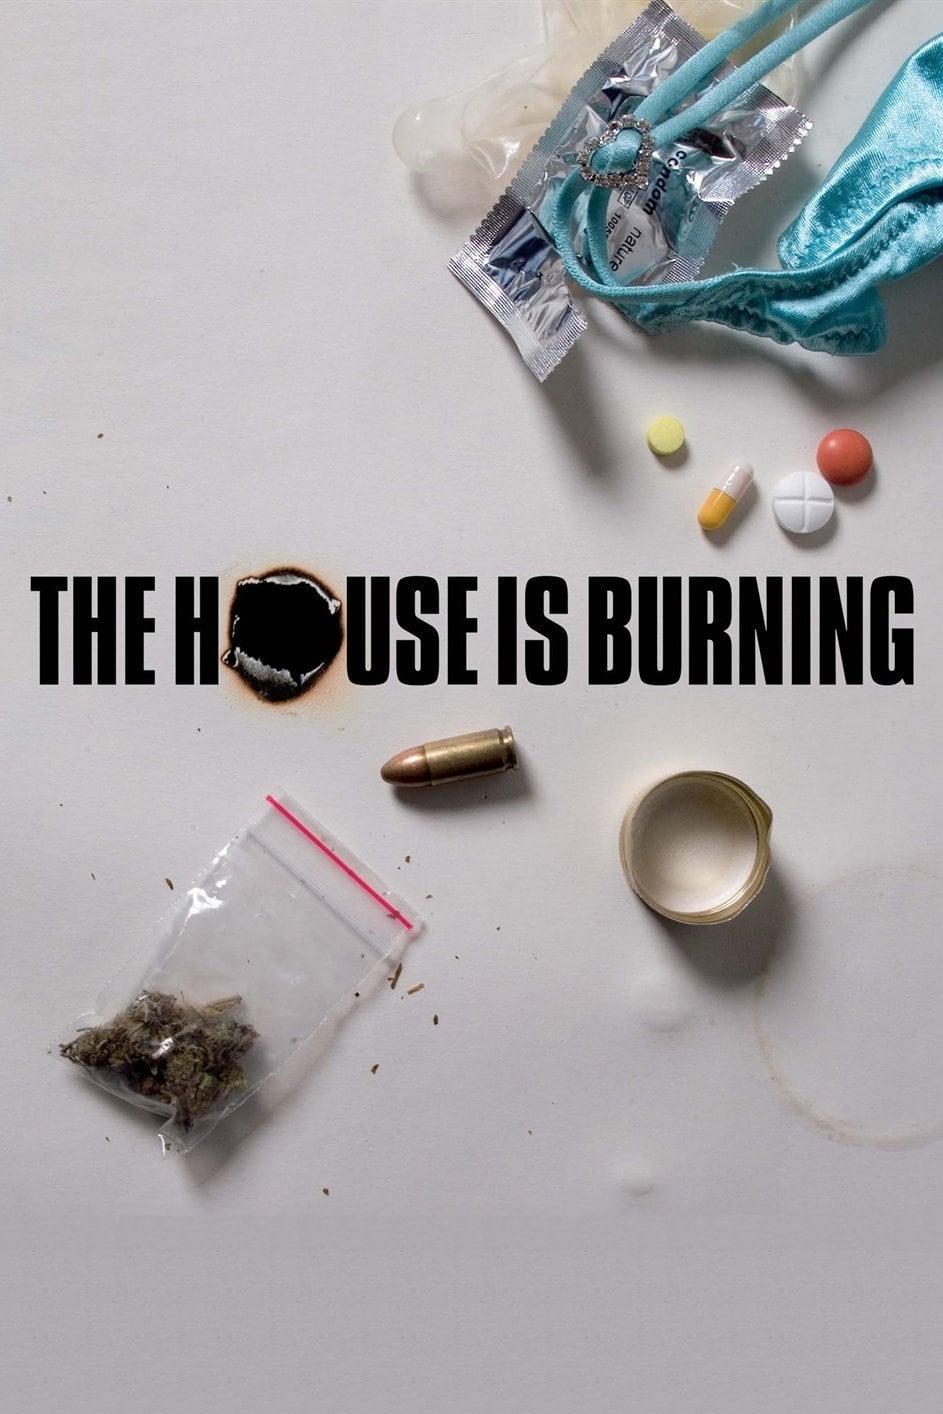 The House is Burning poster